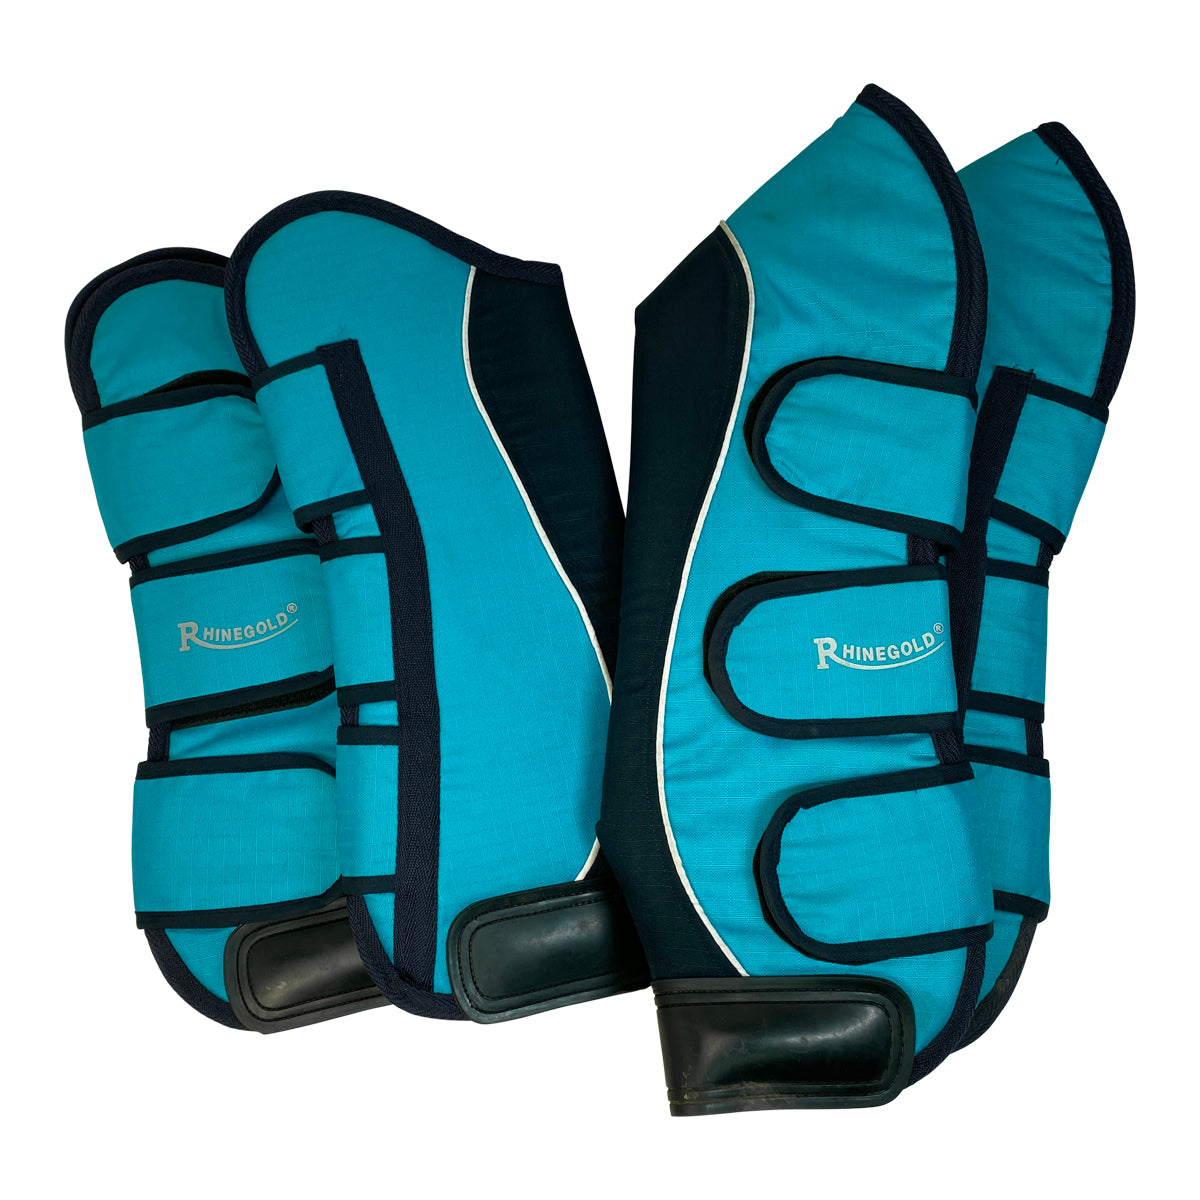 Rhinegold Elite Full Length Travel Boots (Set of 4) in Turquoise/Navy